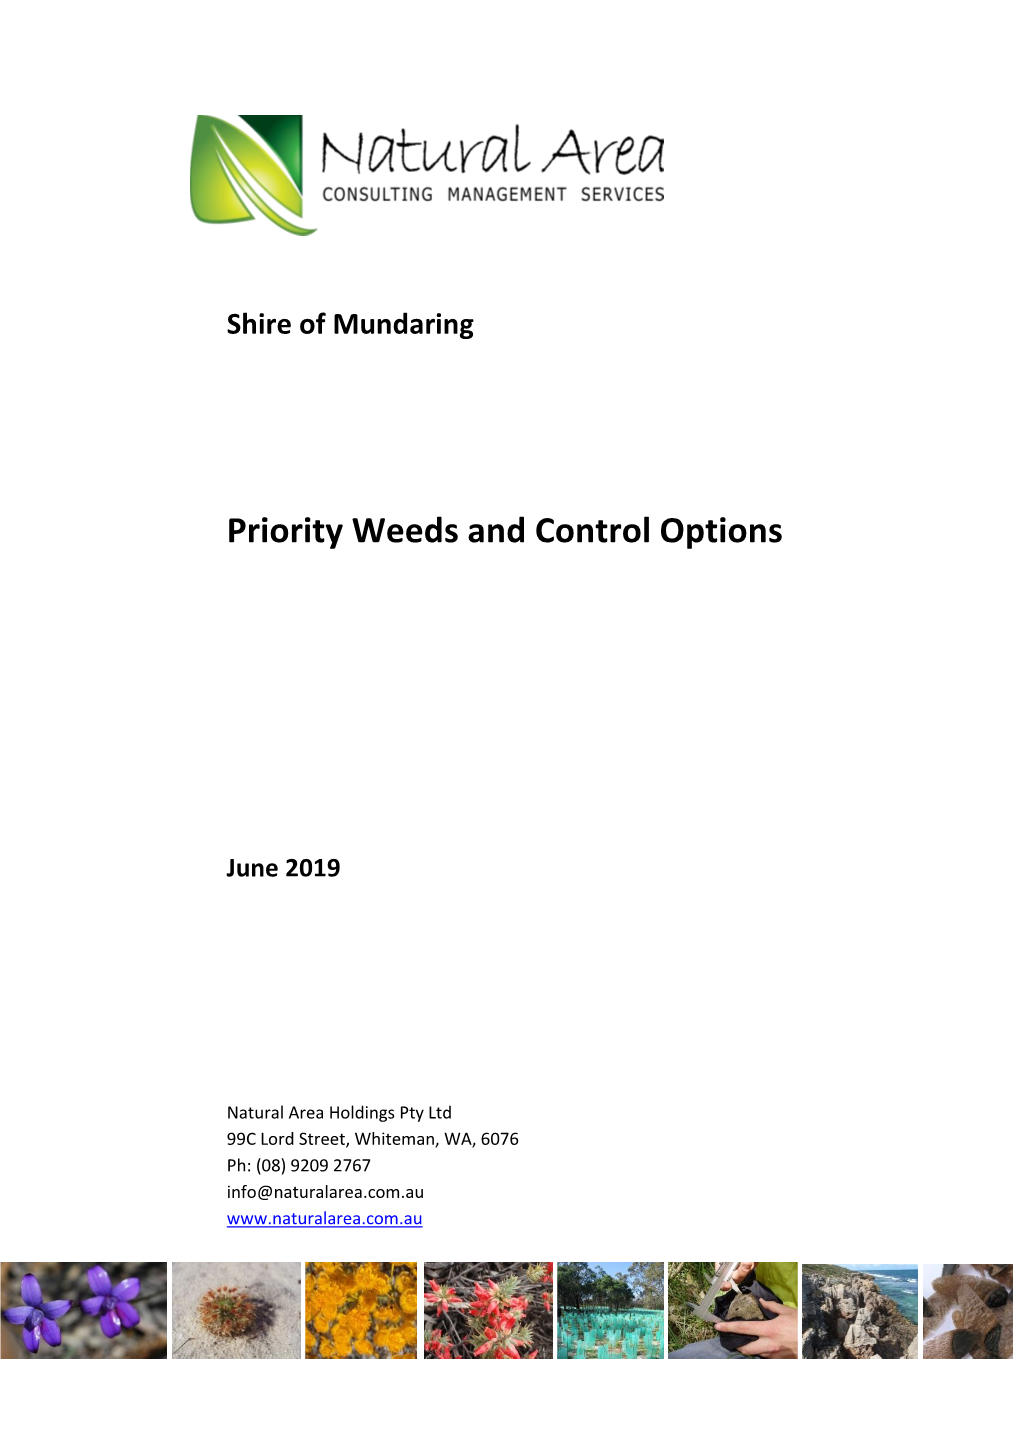 Priority Weeds List and Control Options 2019